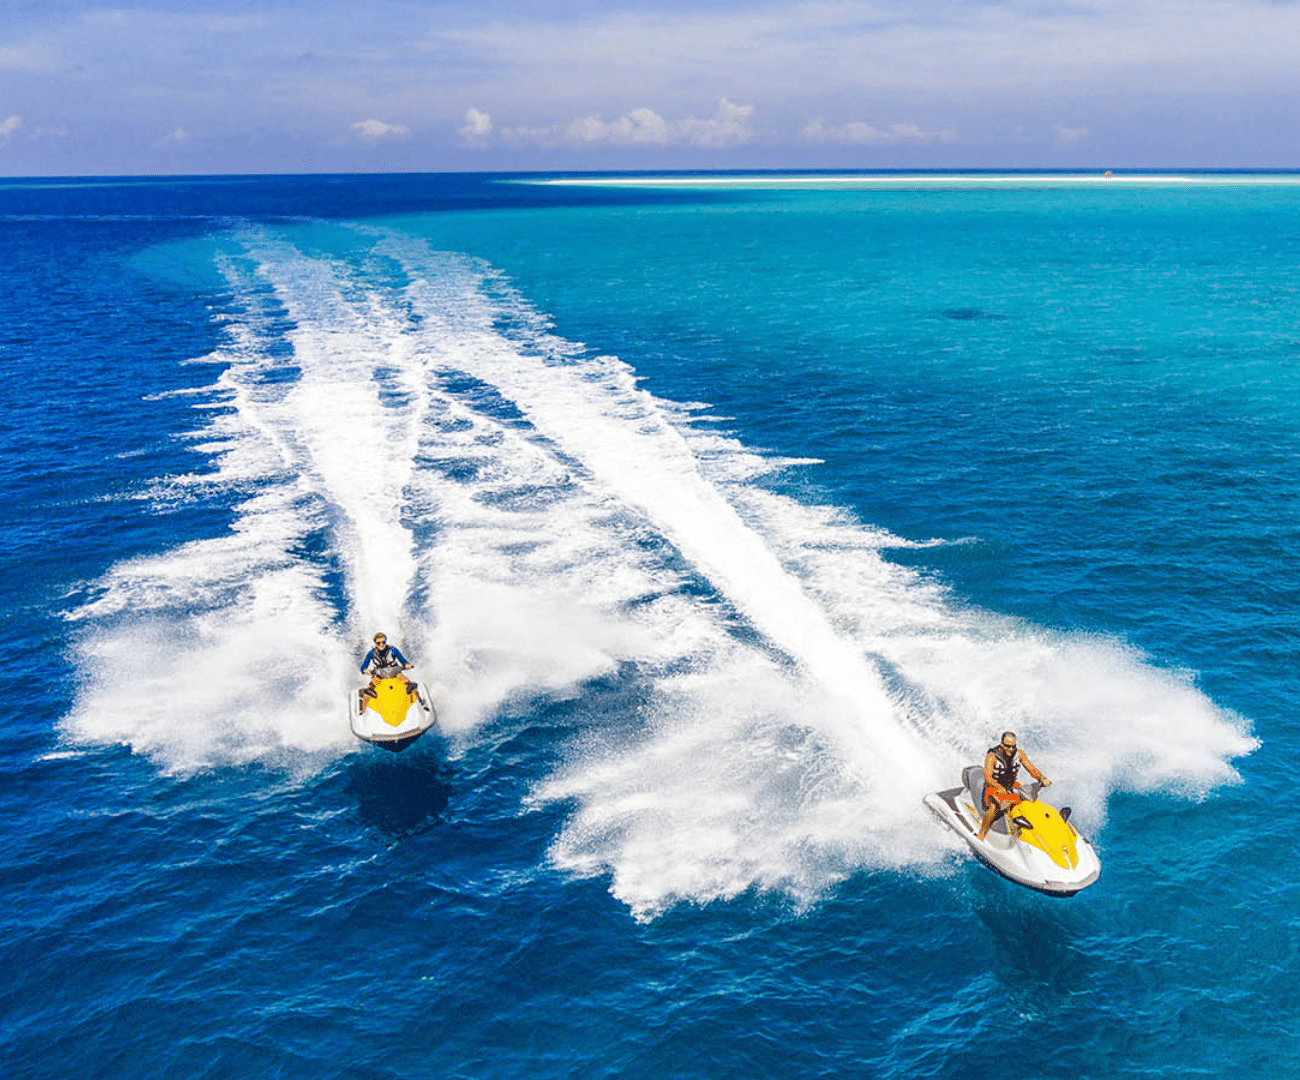 Jet skiing in our maldives tour package